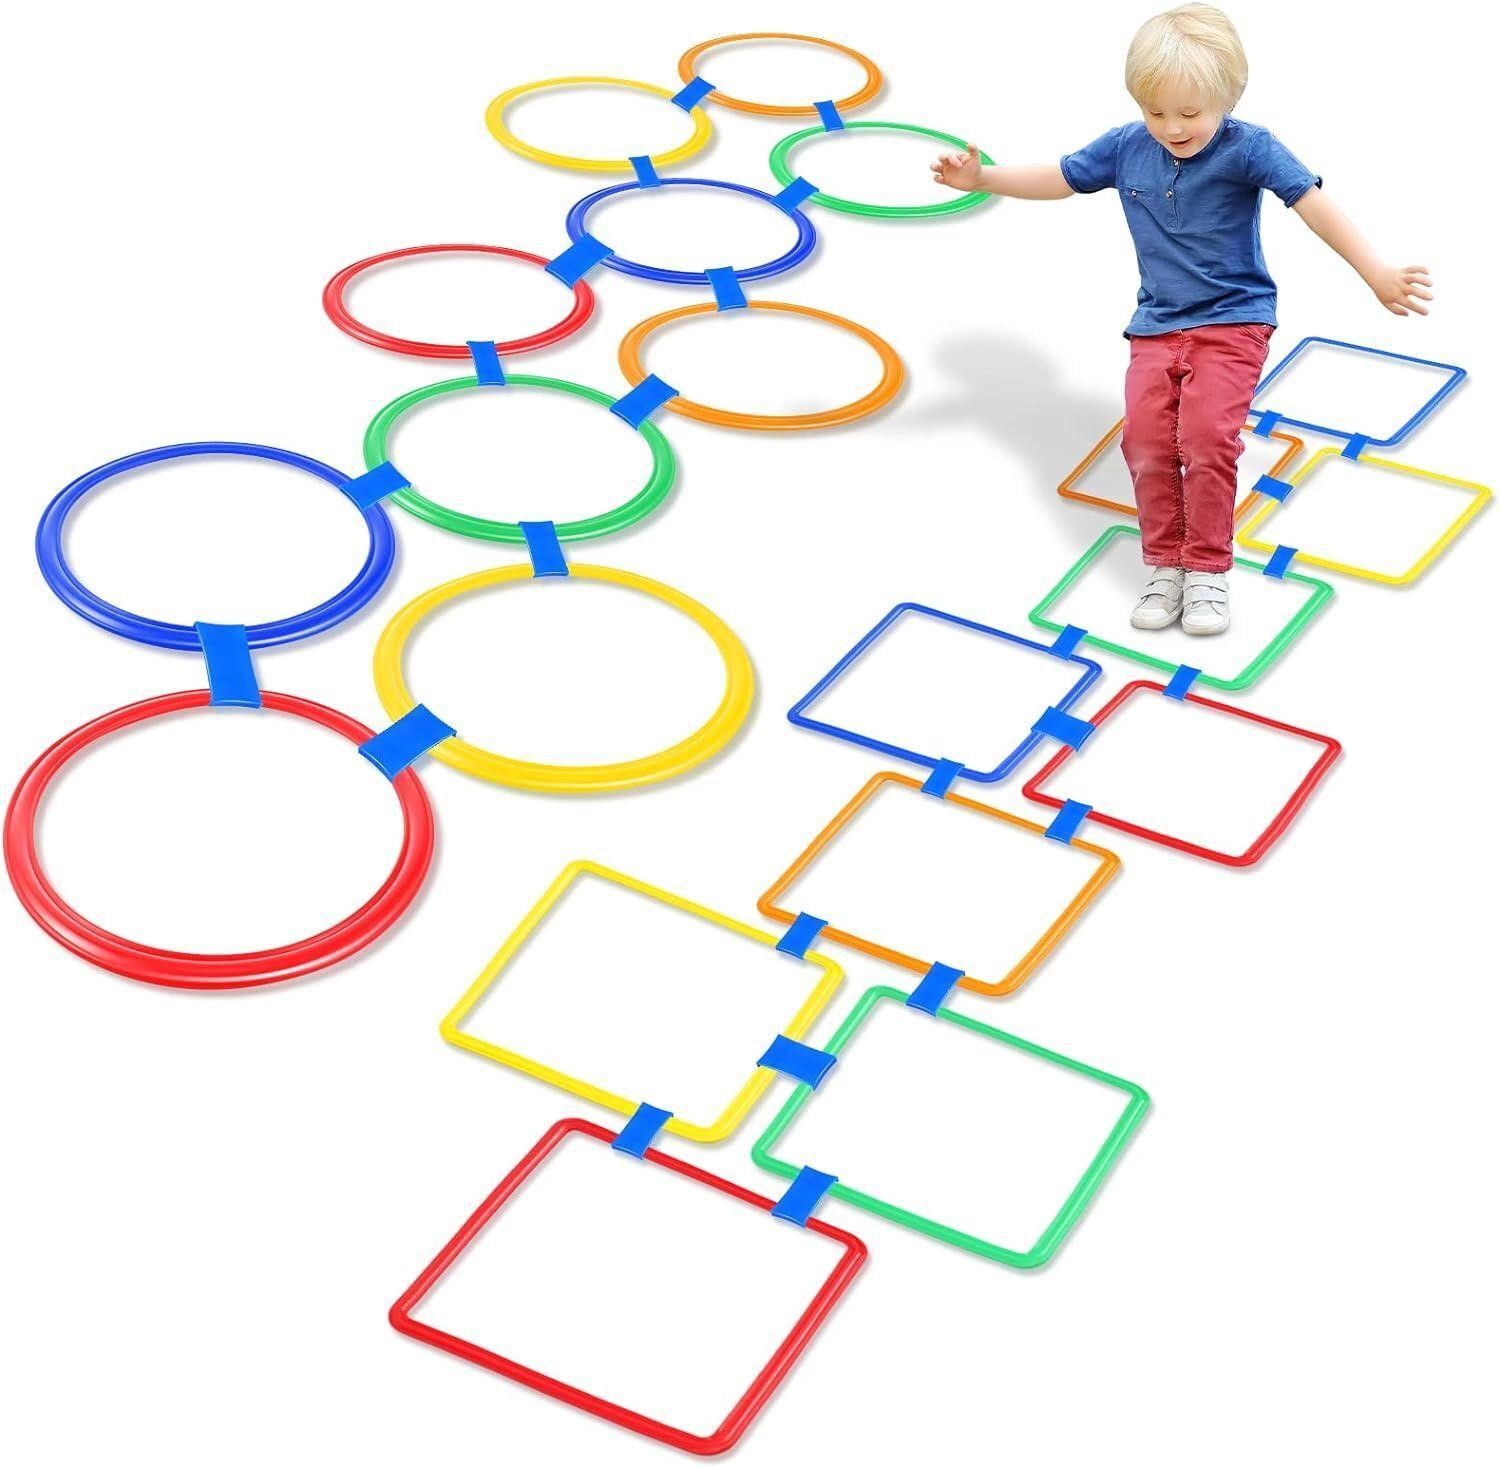 Woanger 2 Sets of Hopscotch Outdoor Ring Game